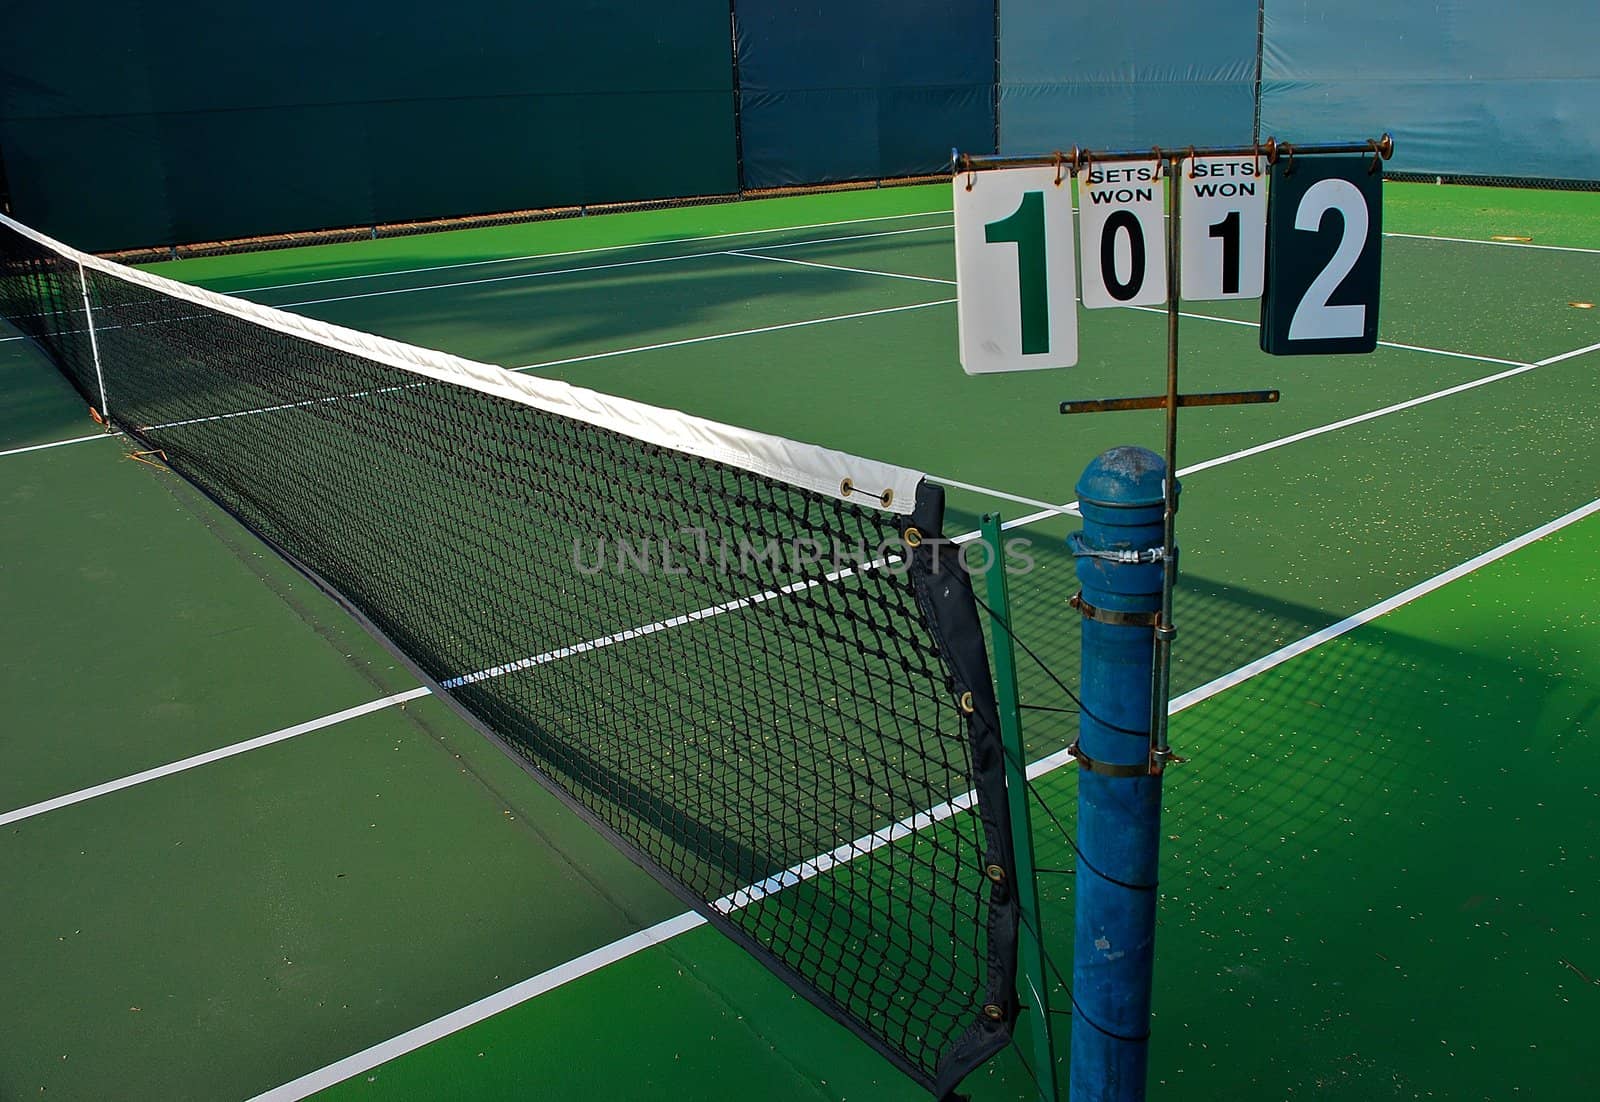 Old Tennis Court with Scoreboard by pixelsnap